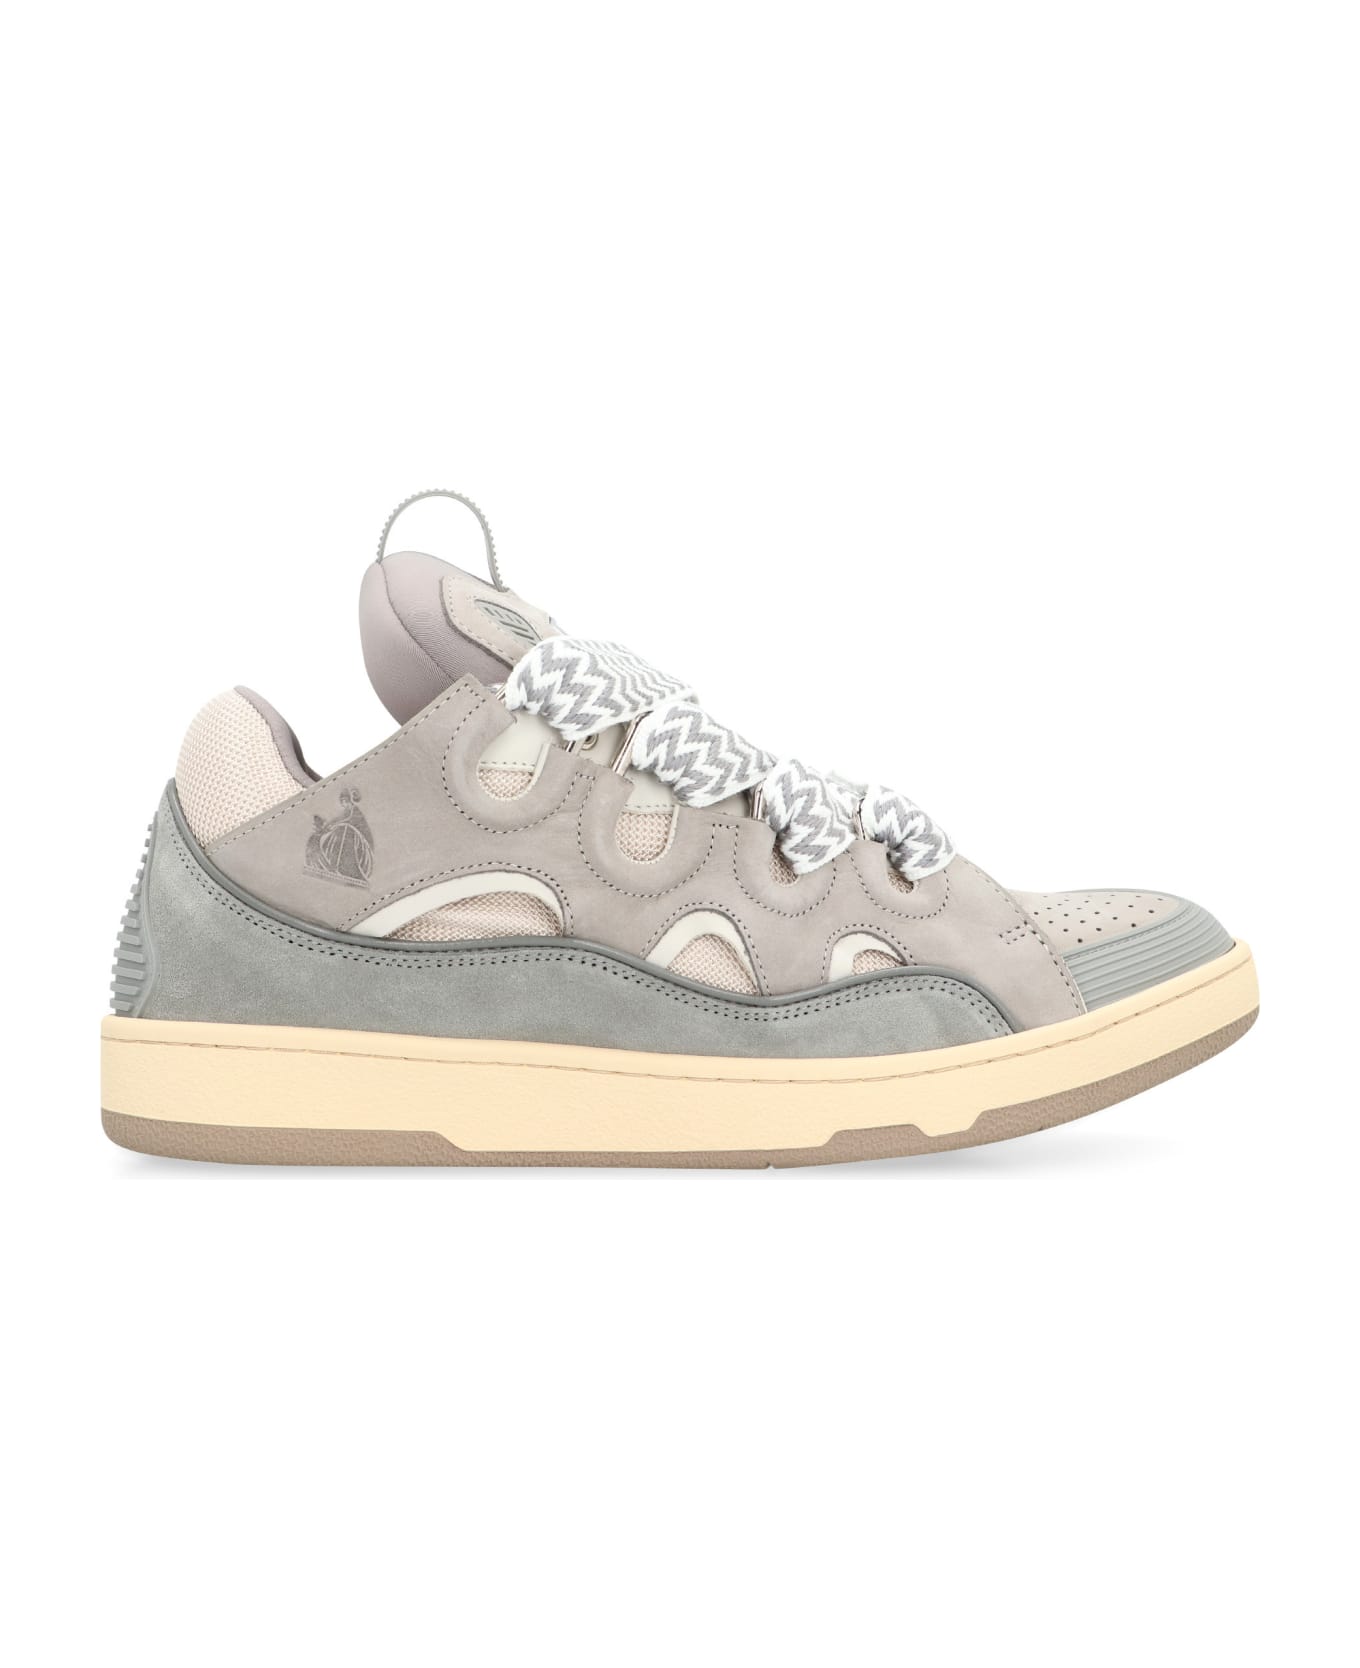 Lanvin Curb Leather Sneakers - Grey